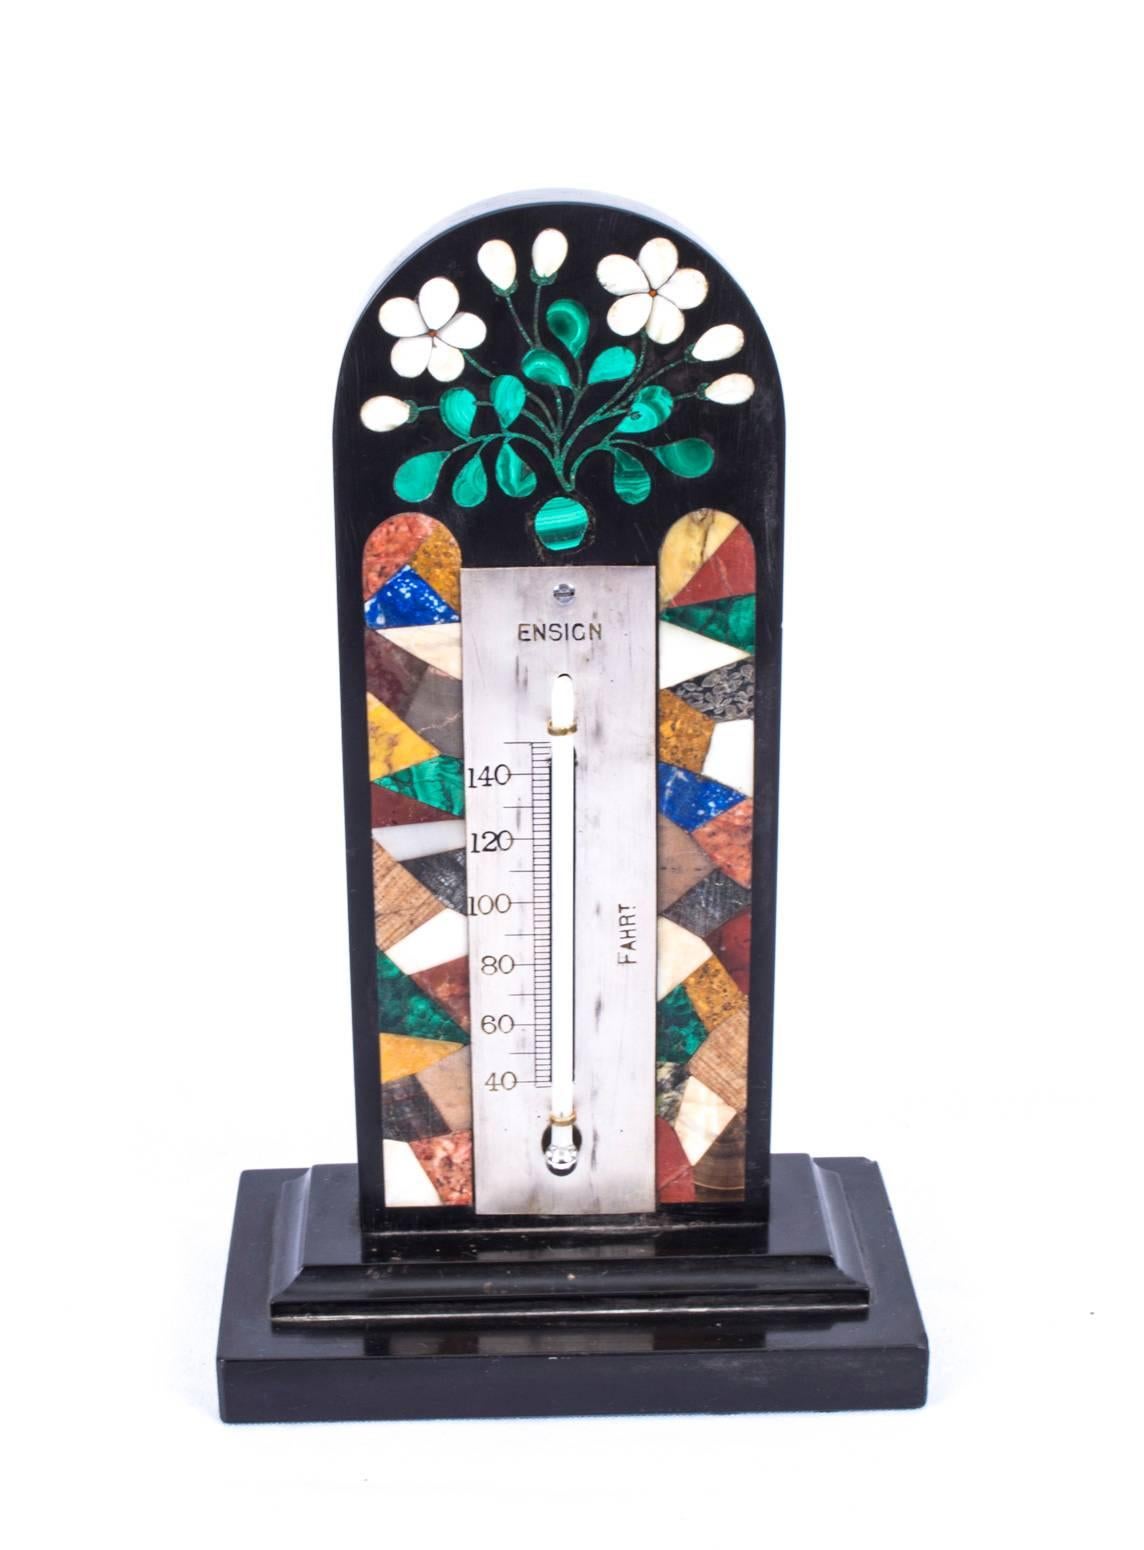 19th century thermometer